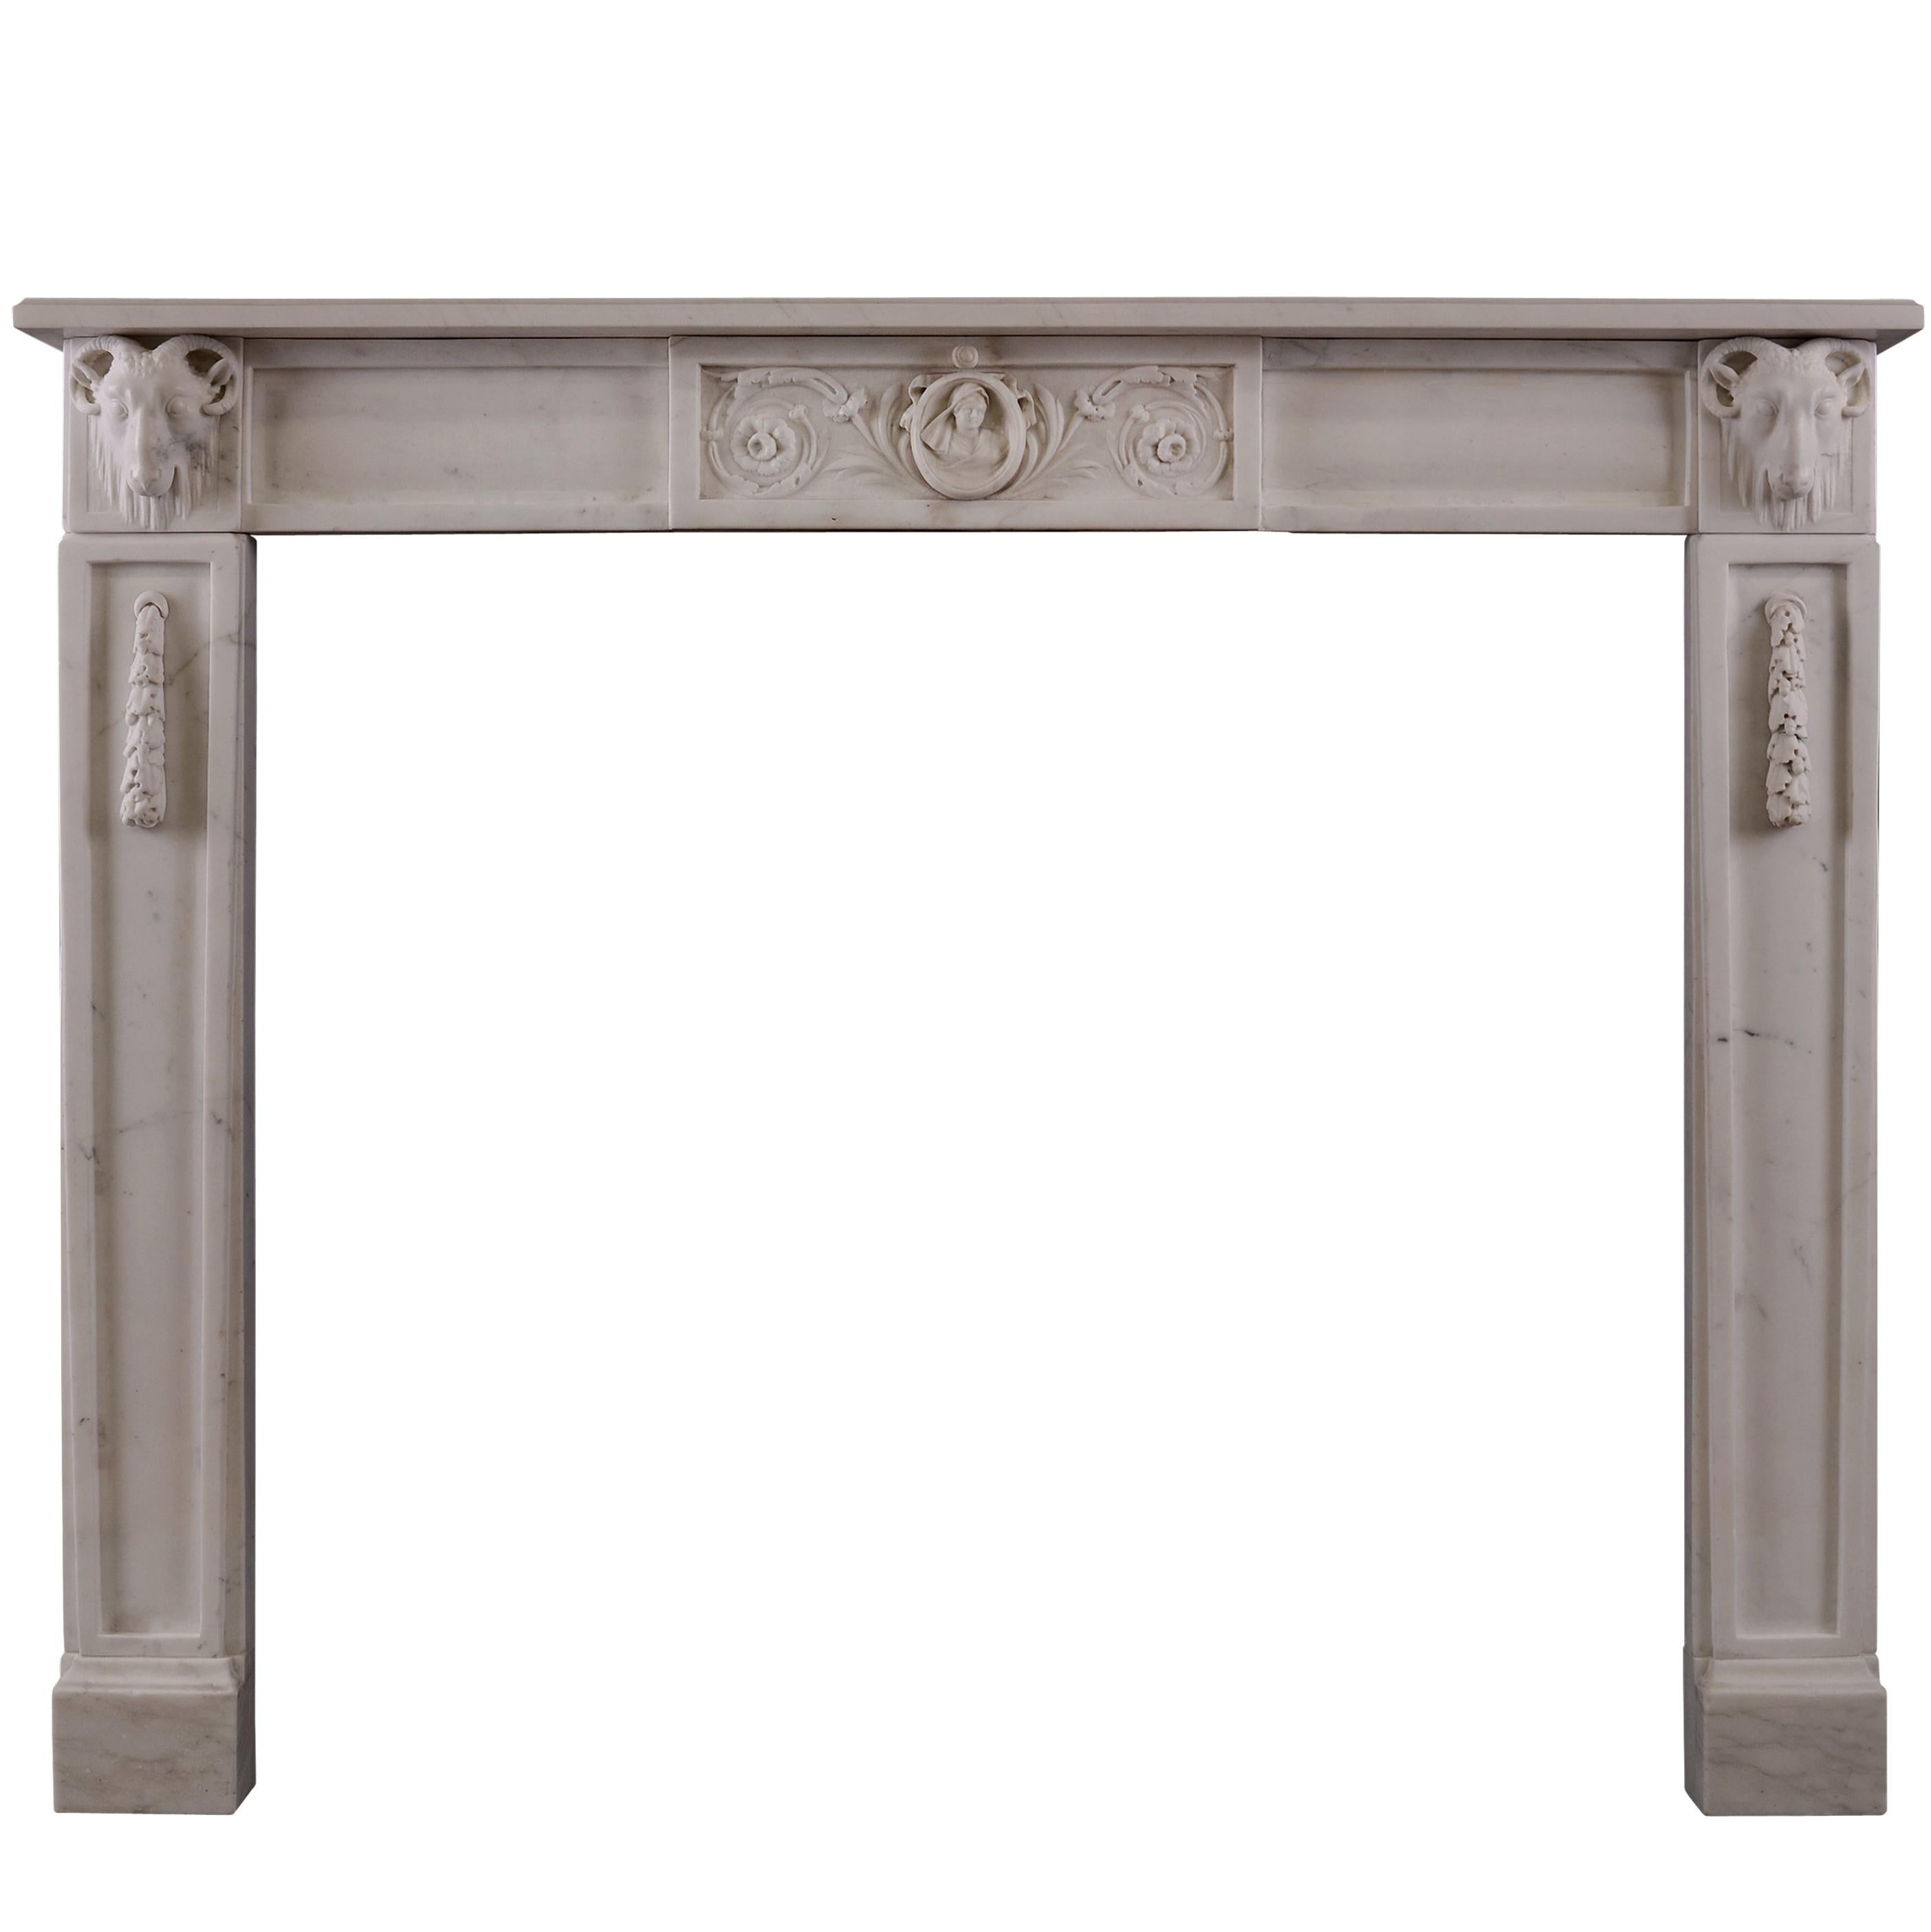 Italian Statuario Marble Fireplace with Carved Rams Heads For Sale